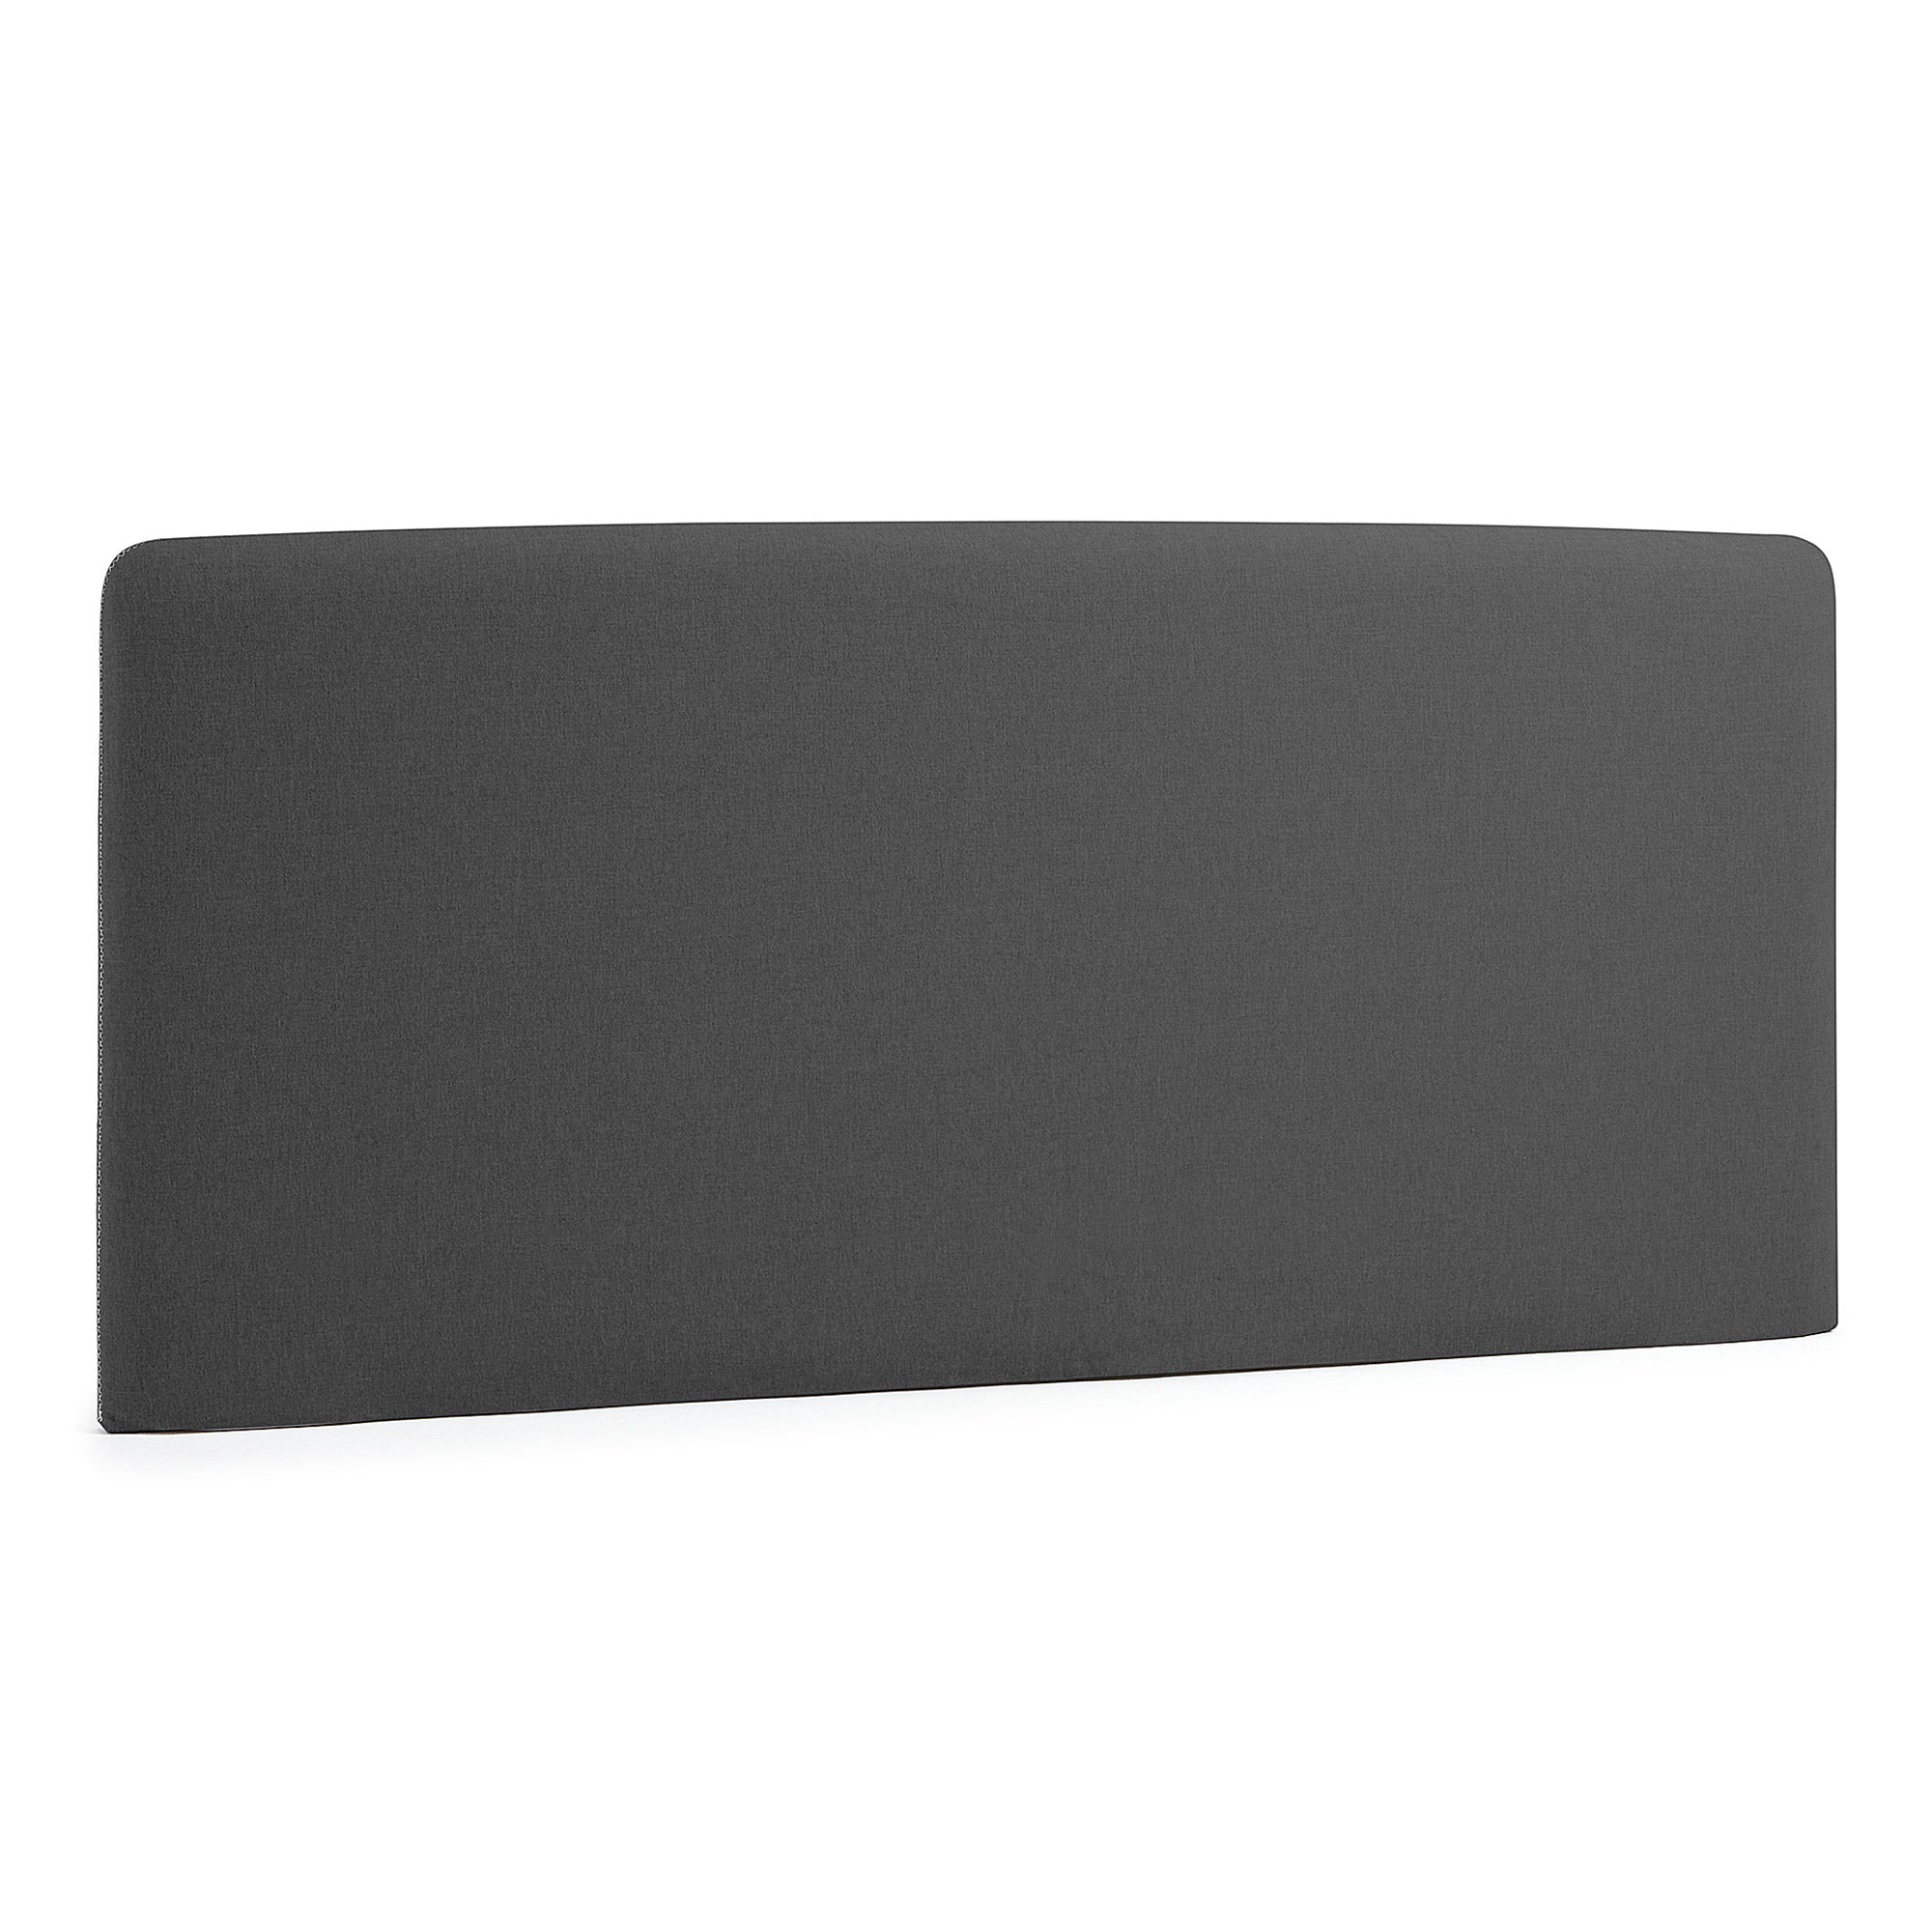 Dyla headboard with removable cover in black, for 150 cm bed